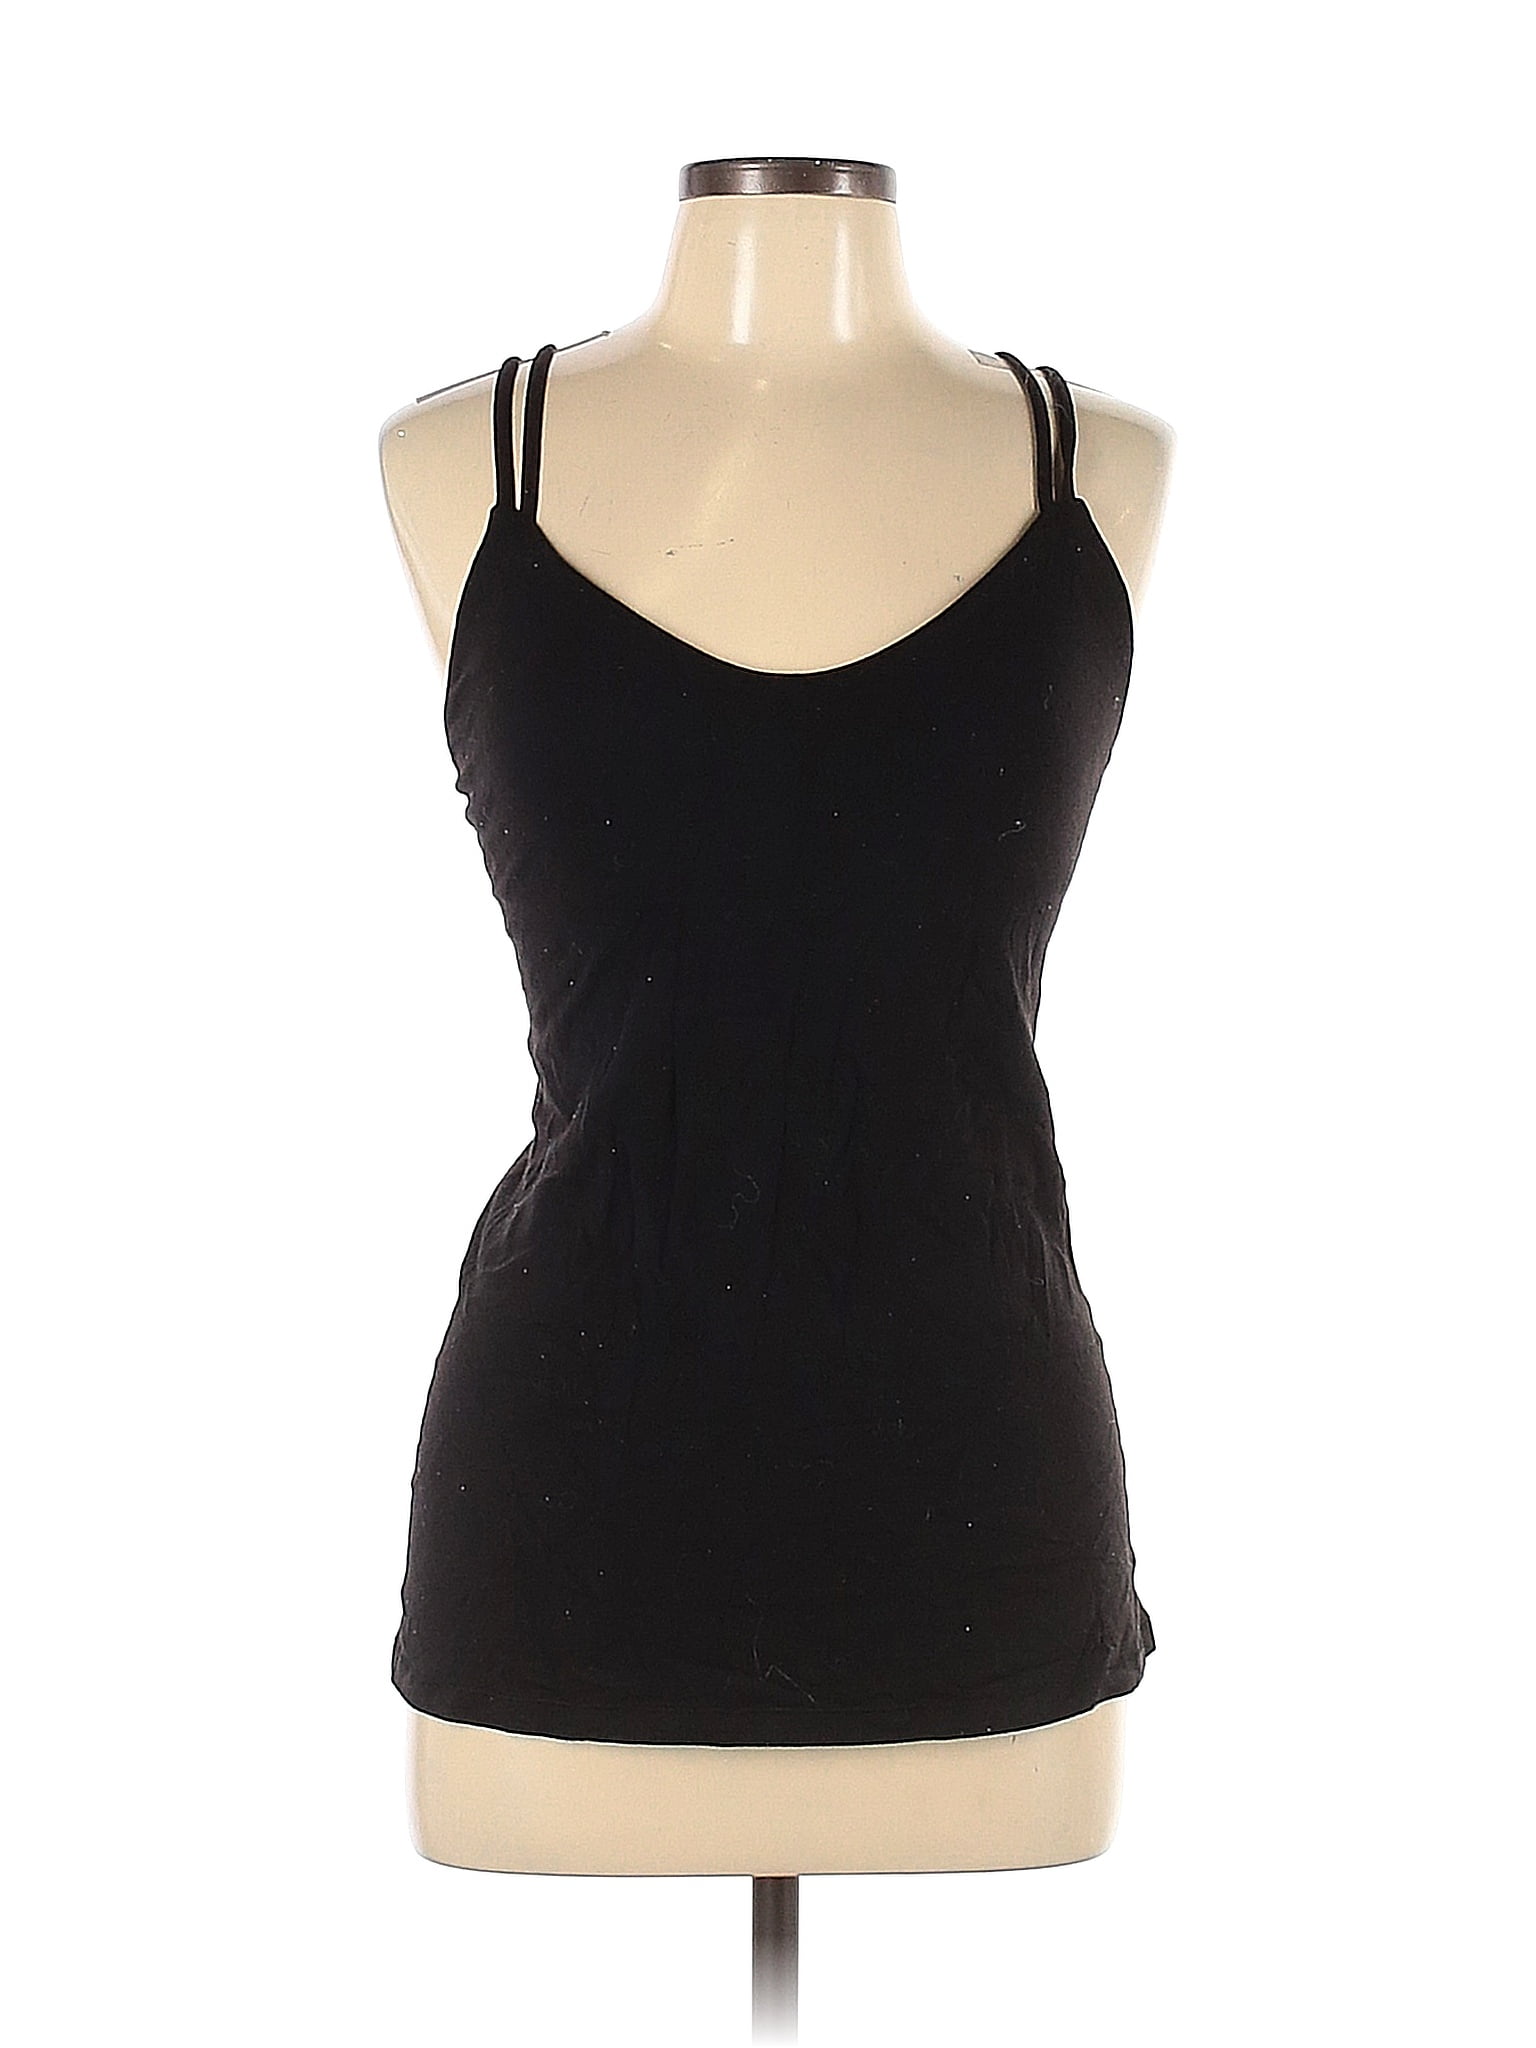 Pre-Owned Lululemon Athletica Womens Size 10 Active Nigeria